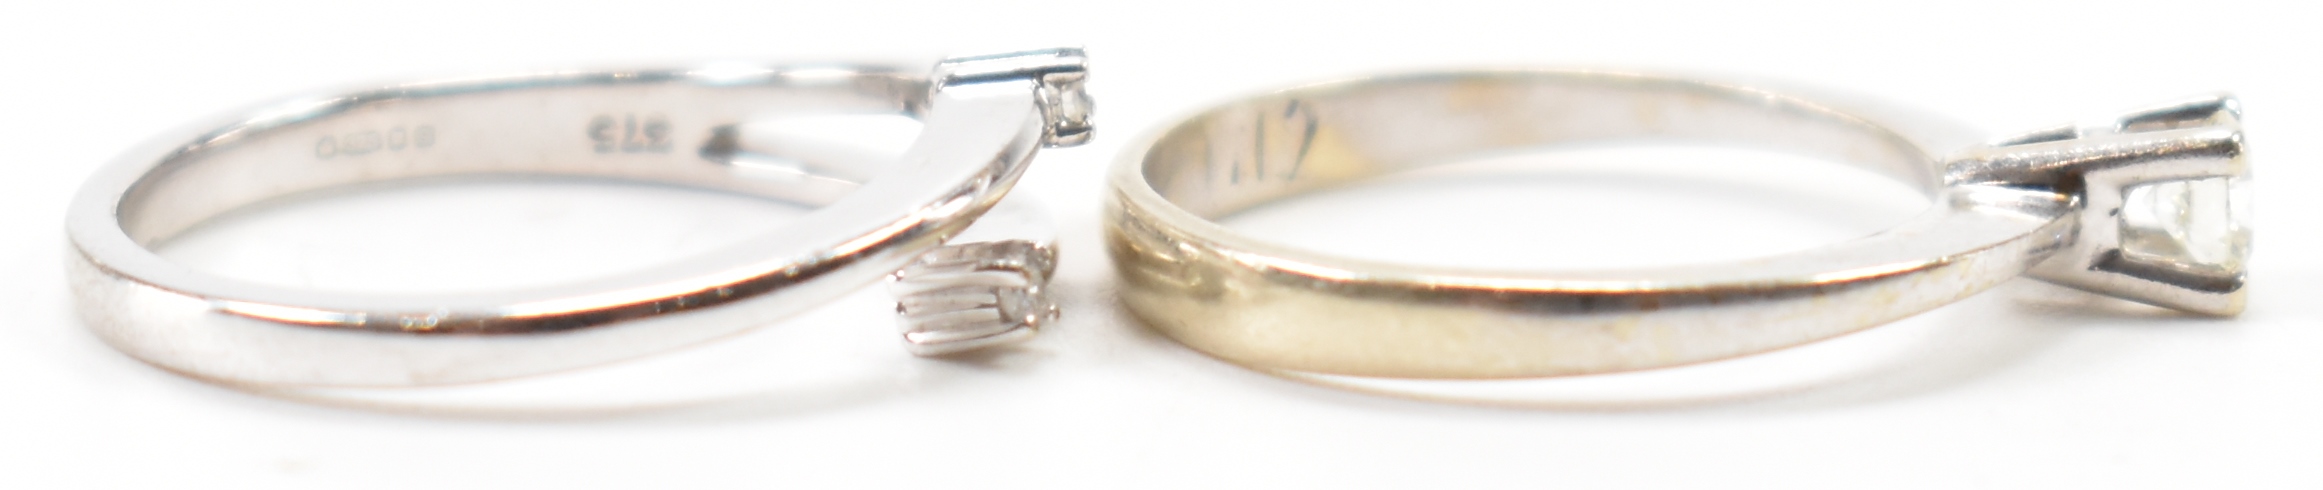 TWO 9CT GOLD & DIAMOND RINGS - Image 5 of 7